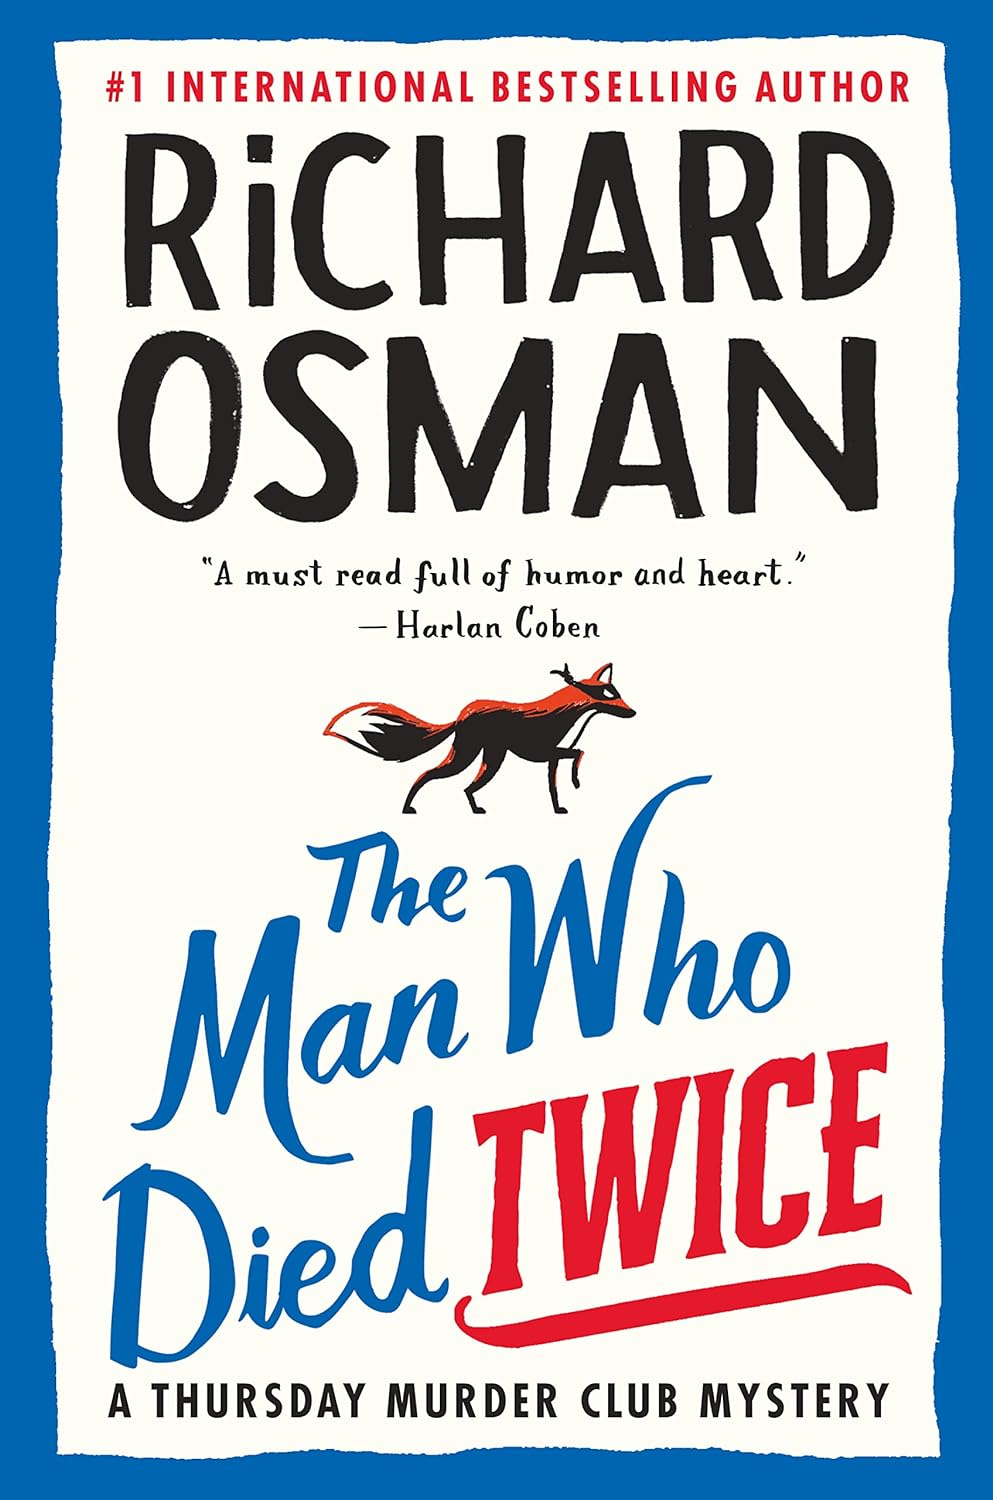 Image for "The Man Who Died Twice: A Thursday Murder Club Mystery"